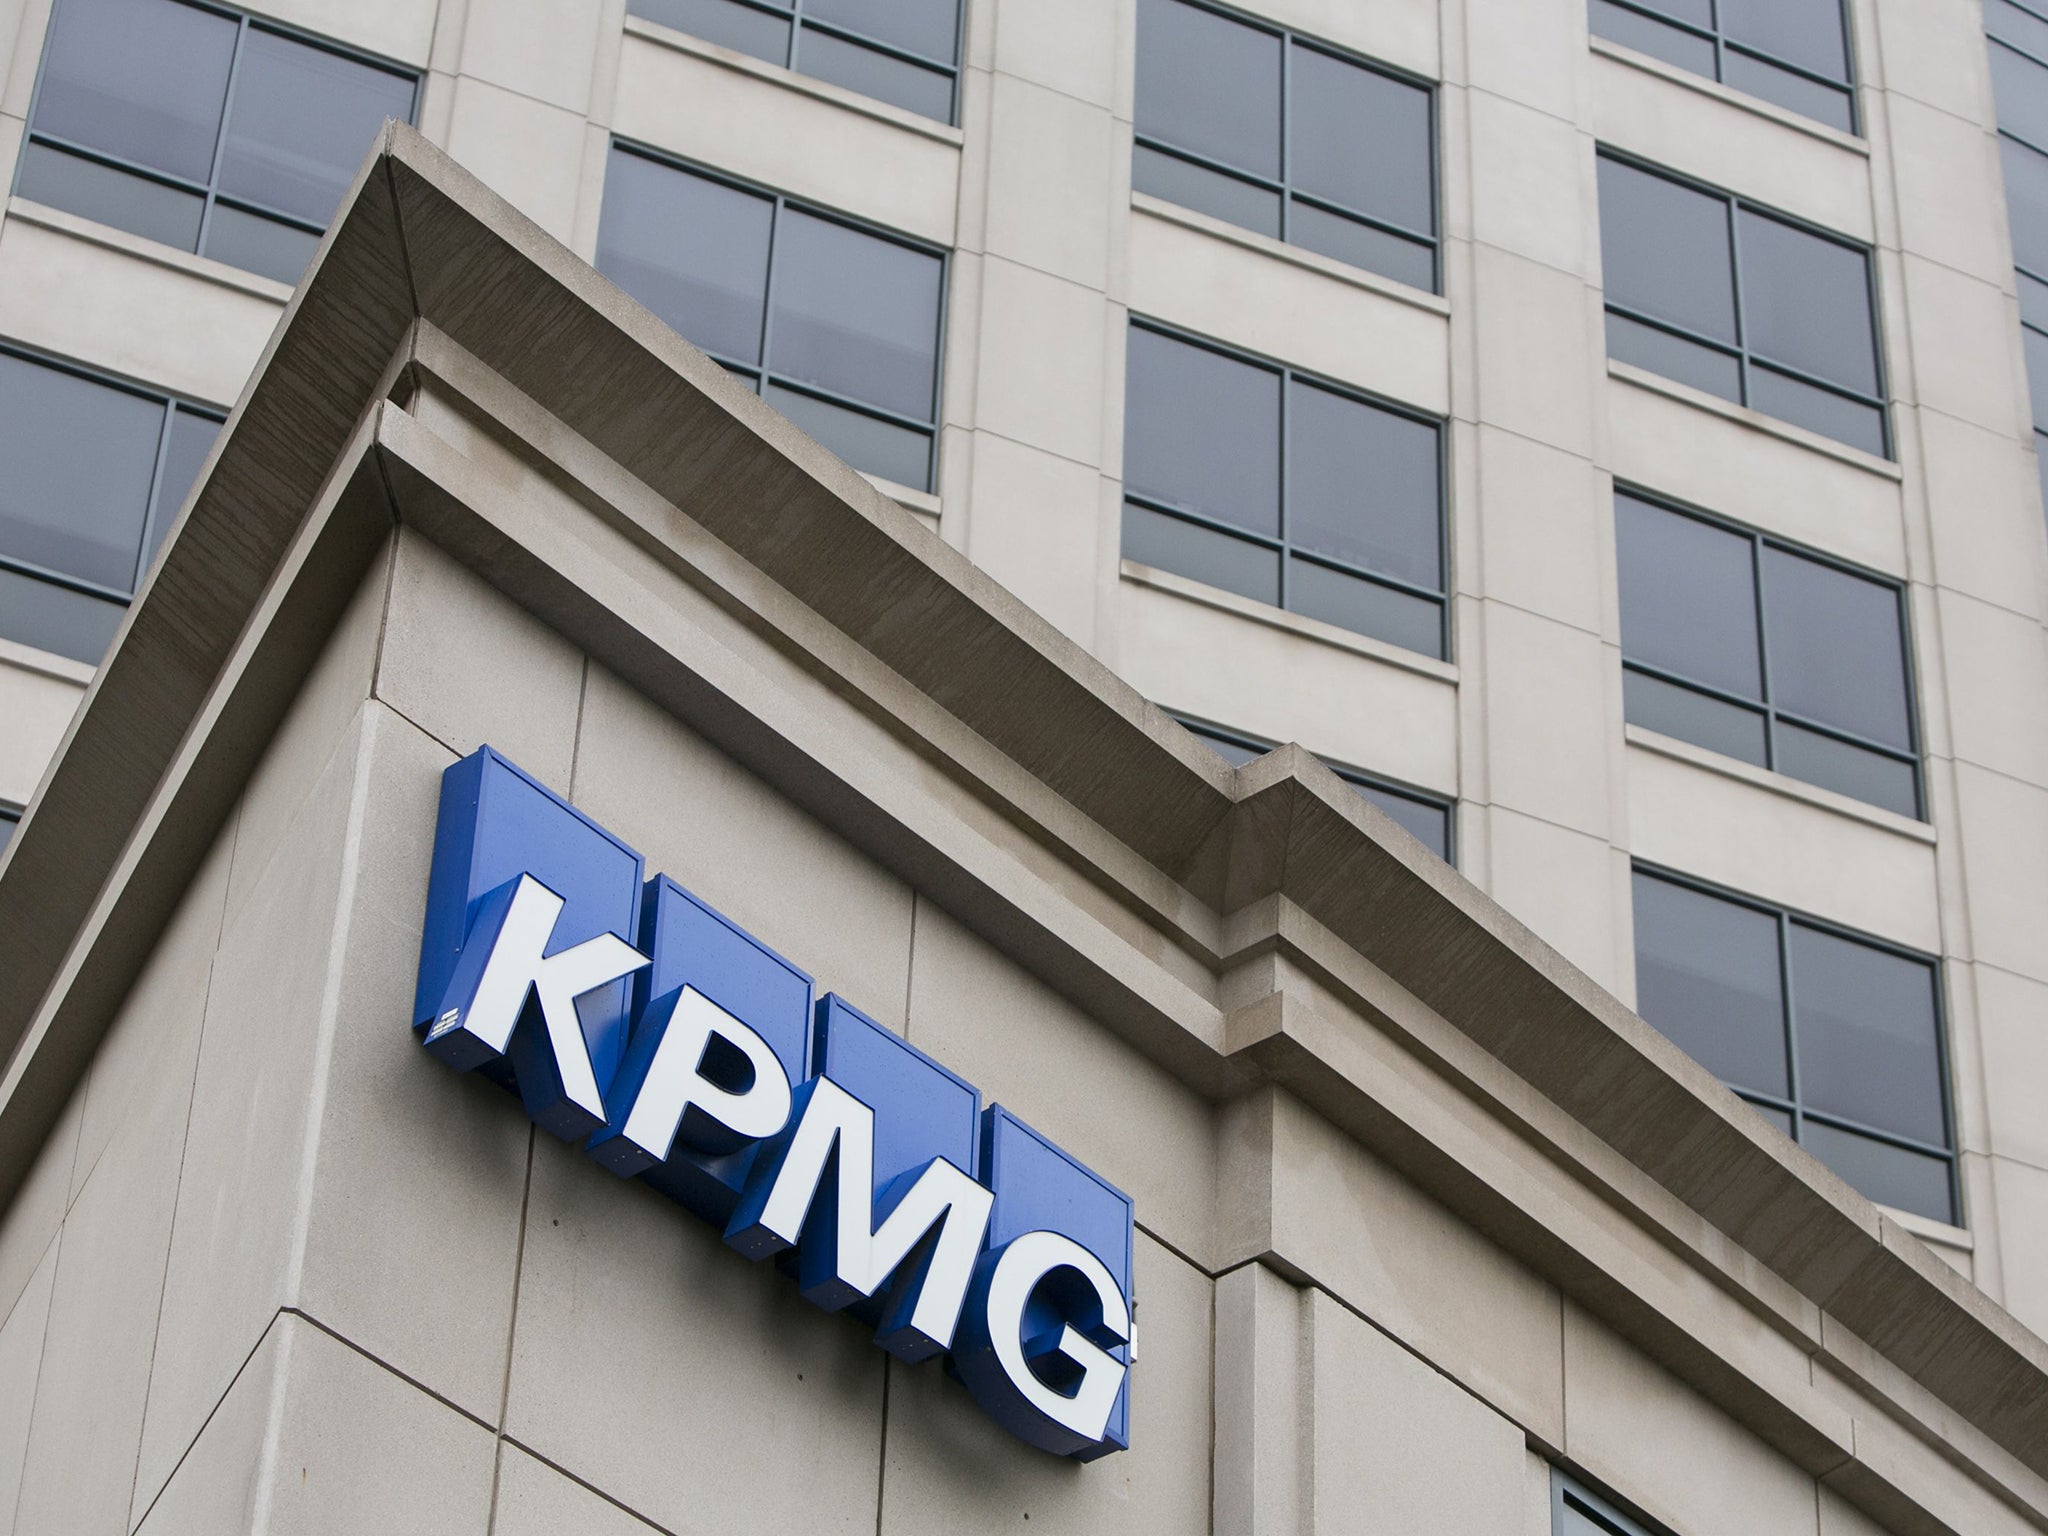 KPMG’s audit of HBOS has come under scrutiny